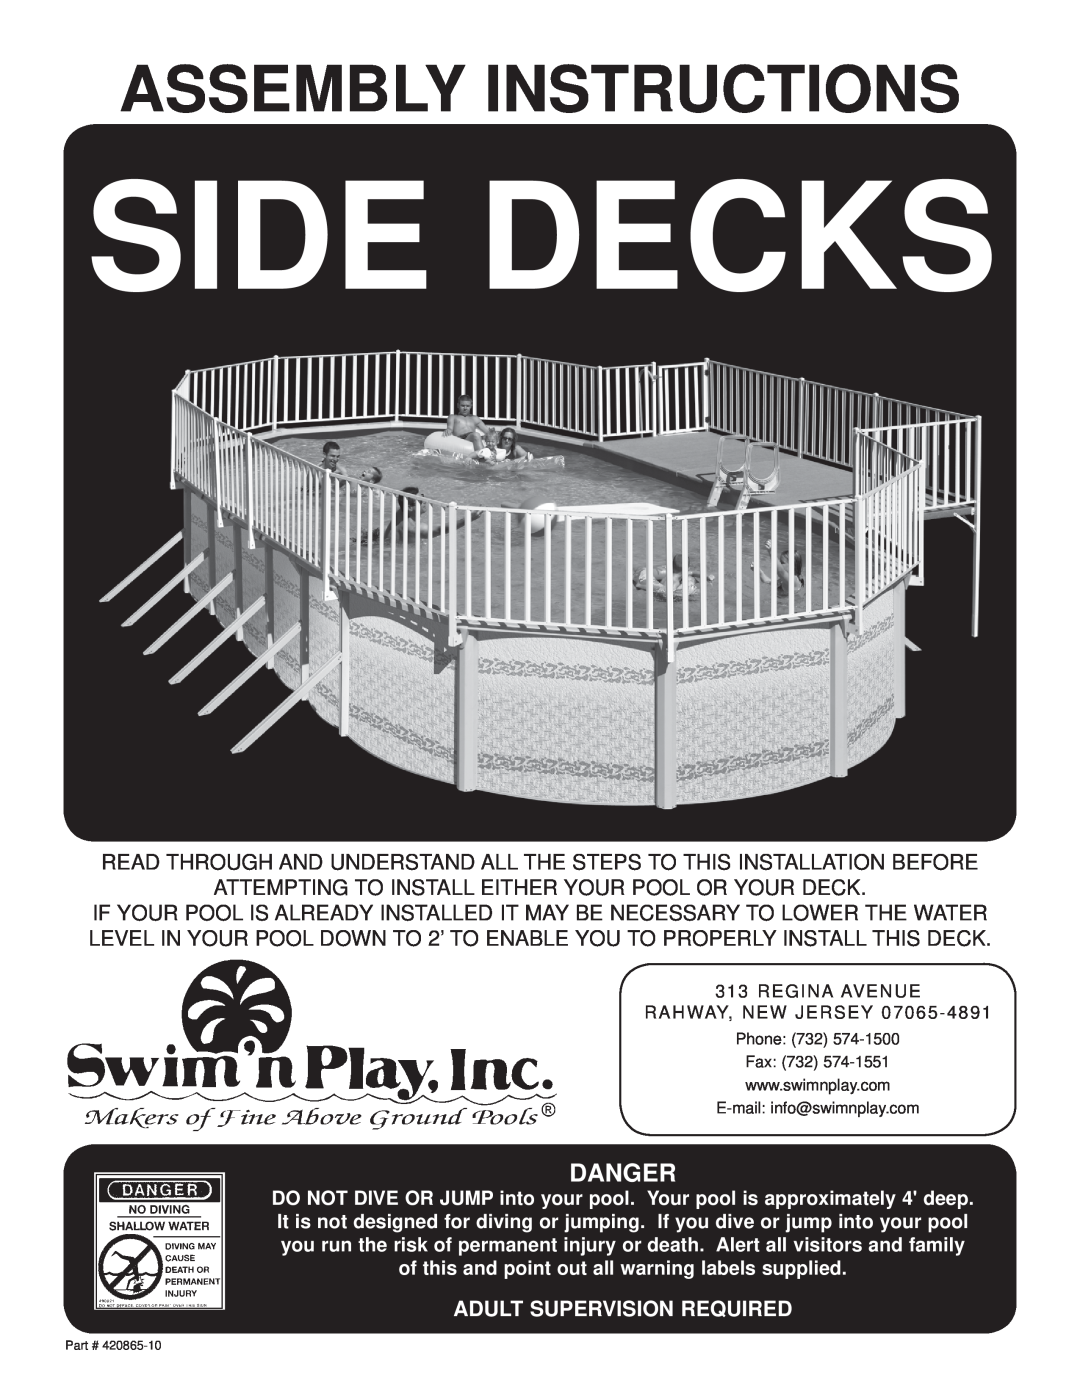 Swim'n Play side deck manual Side Decks, Assembly Instructions, Danger, Adult Supervision Required 